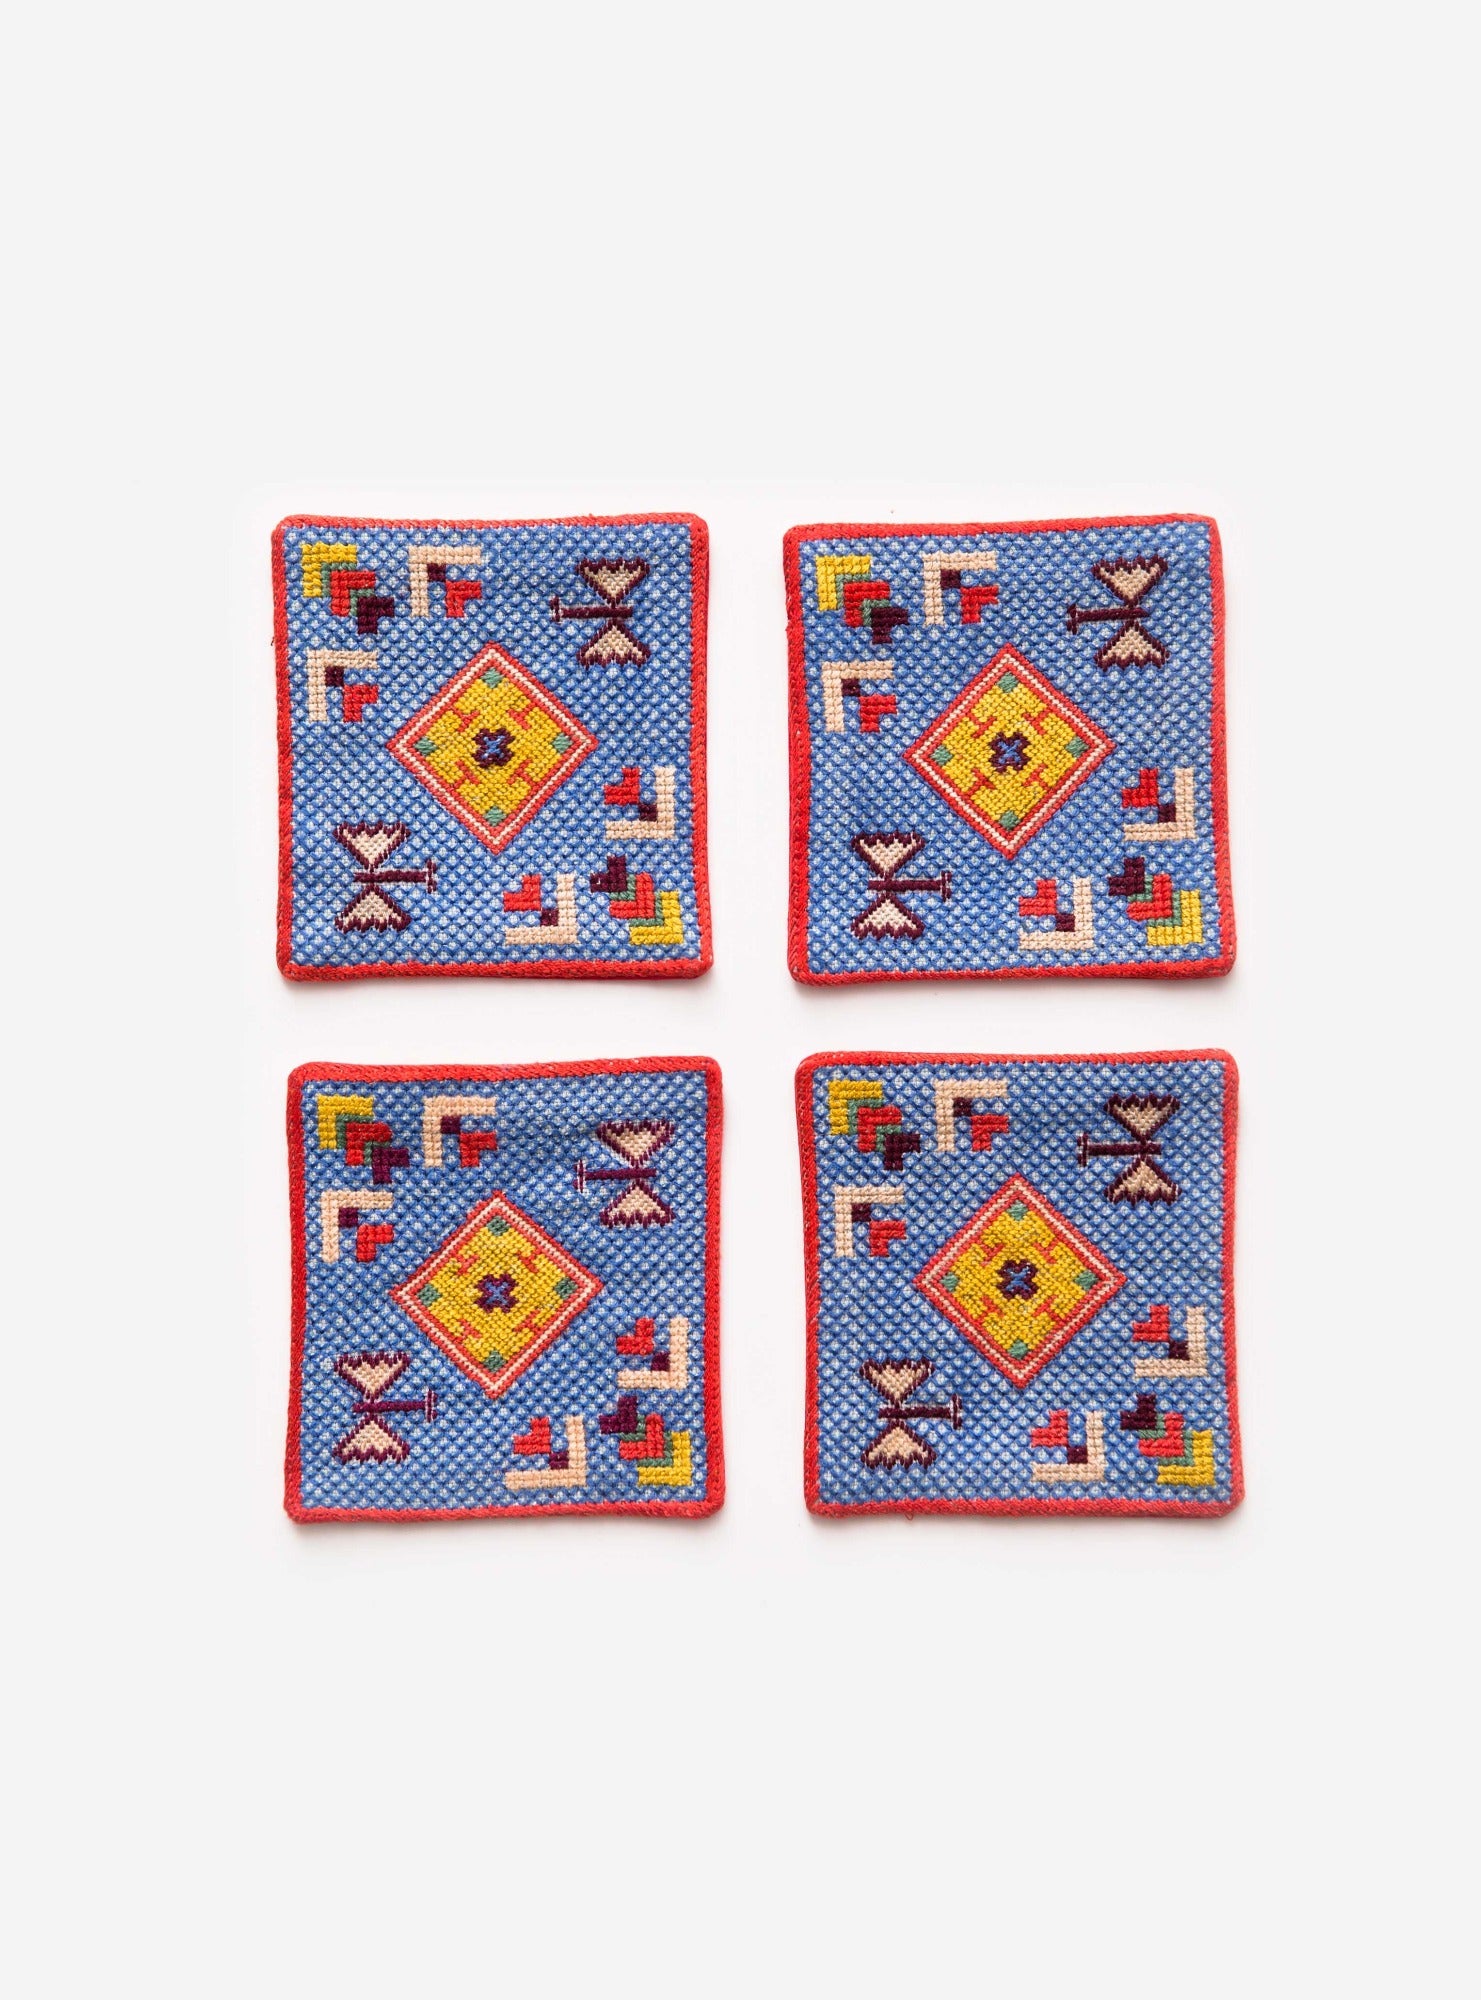 4 Nile Blue Persian Garden coasters with Baluchi embroidery